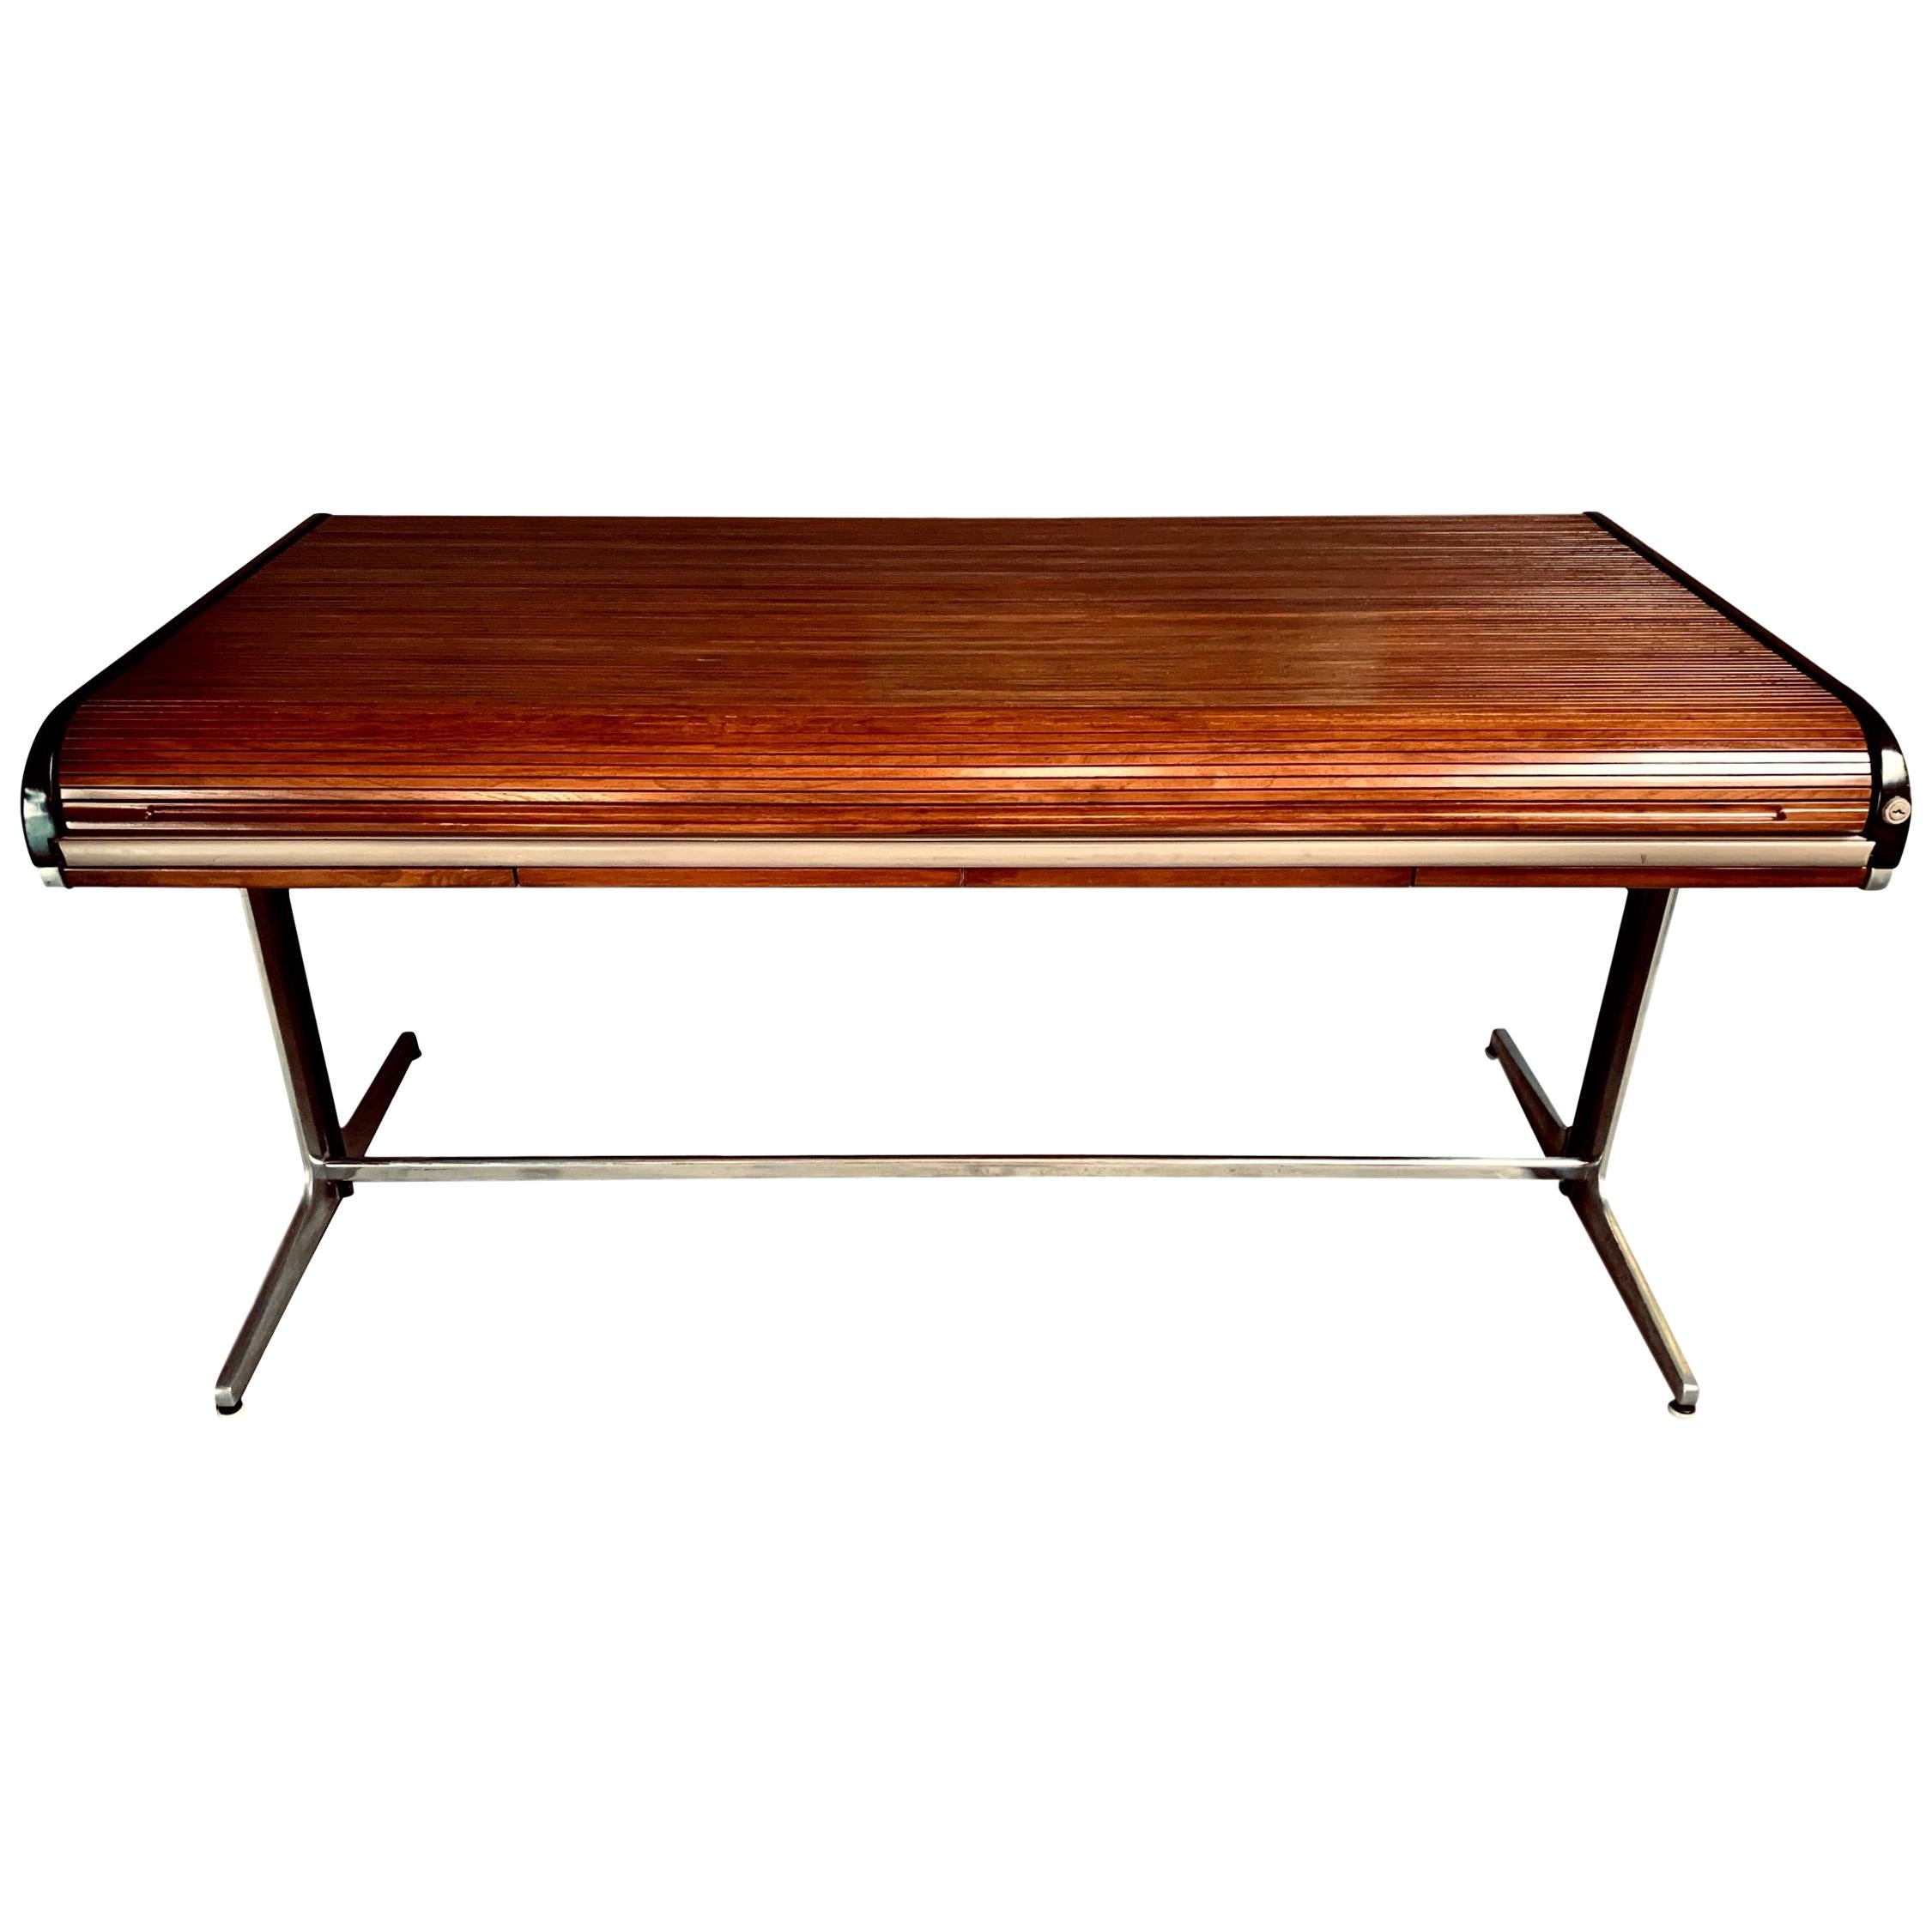 George Nelson Roll-Top Desk